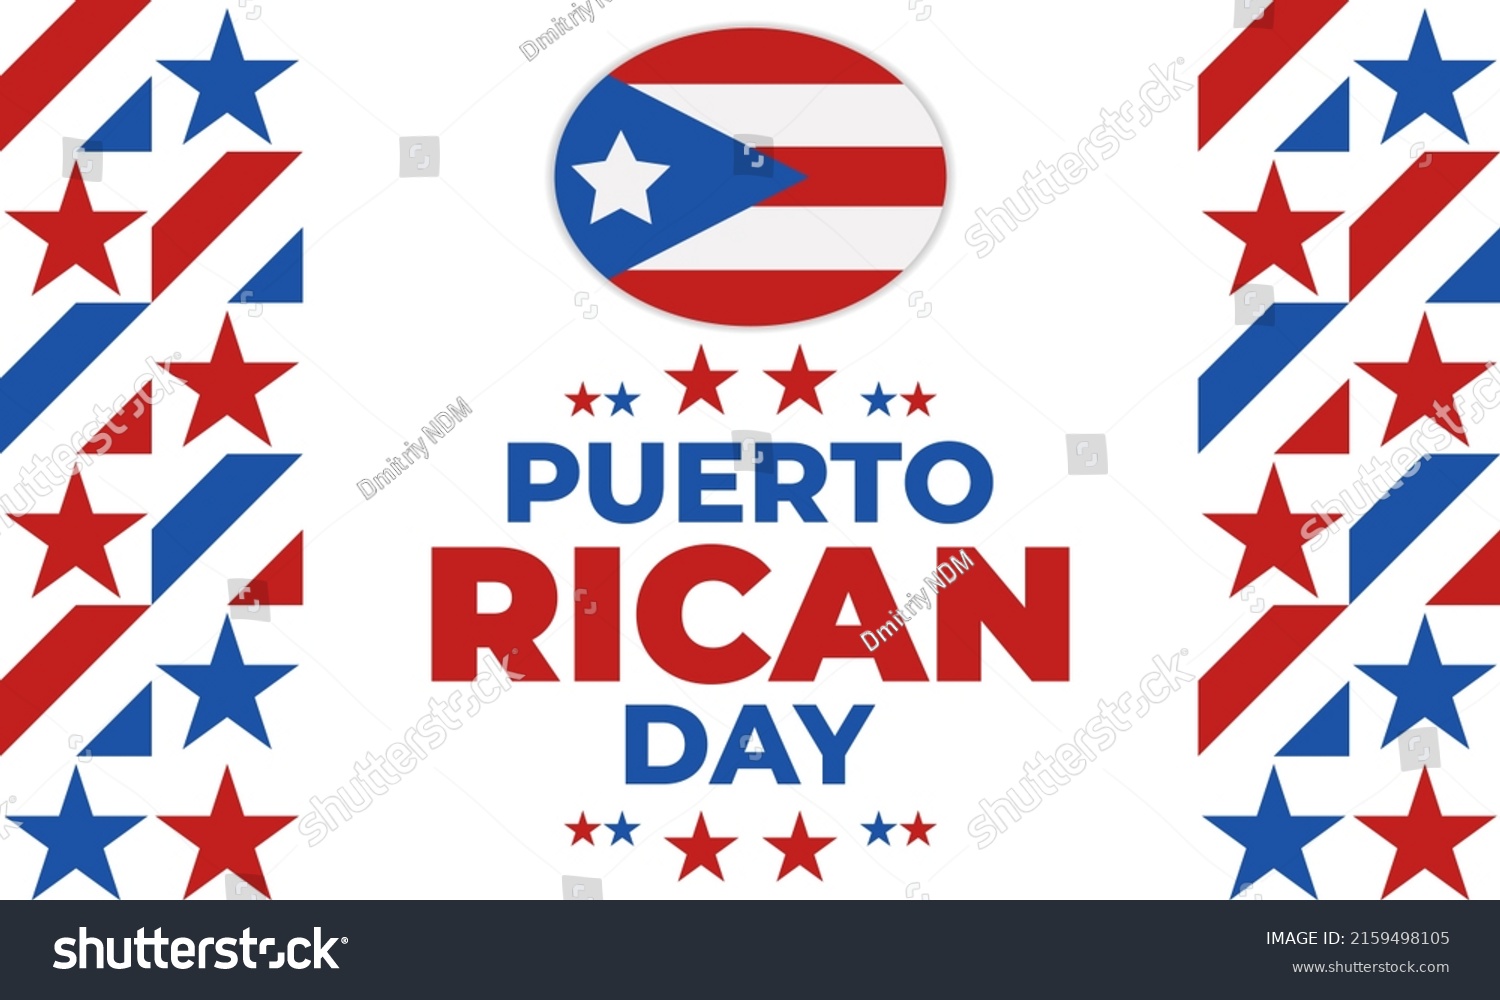 Puerto Rican Day. National Puerto Rican Day - Royalty Free Stock Vector ...